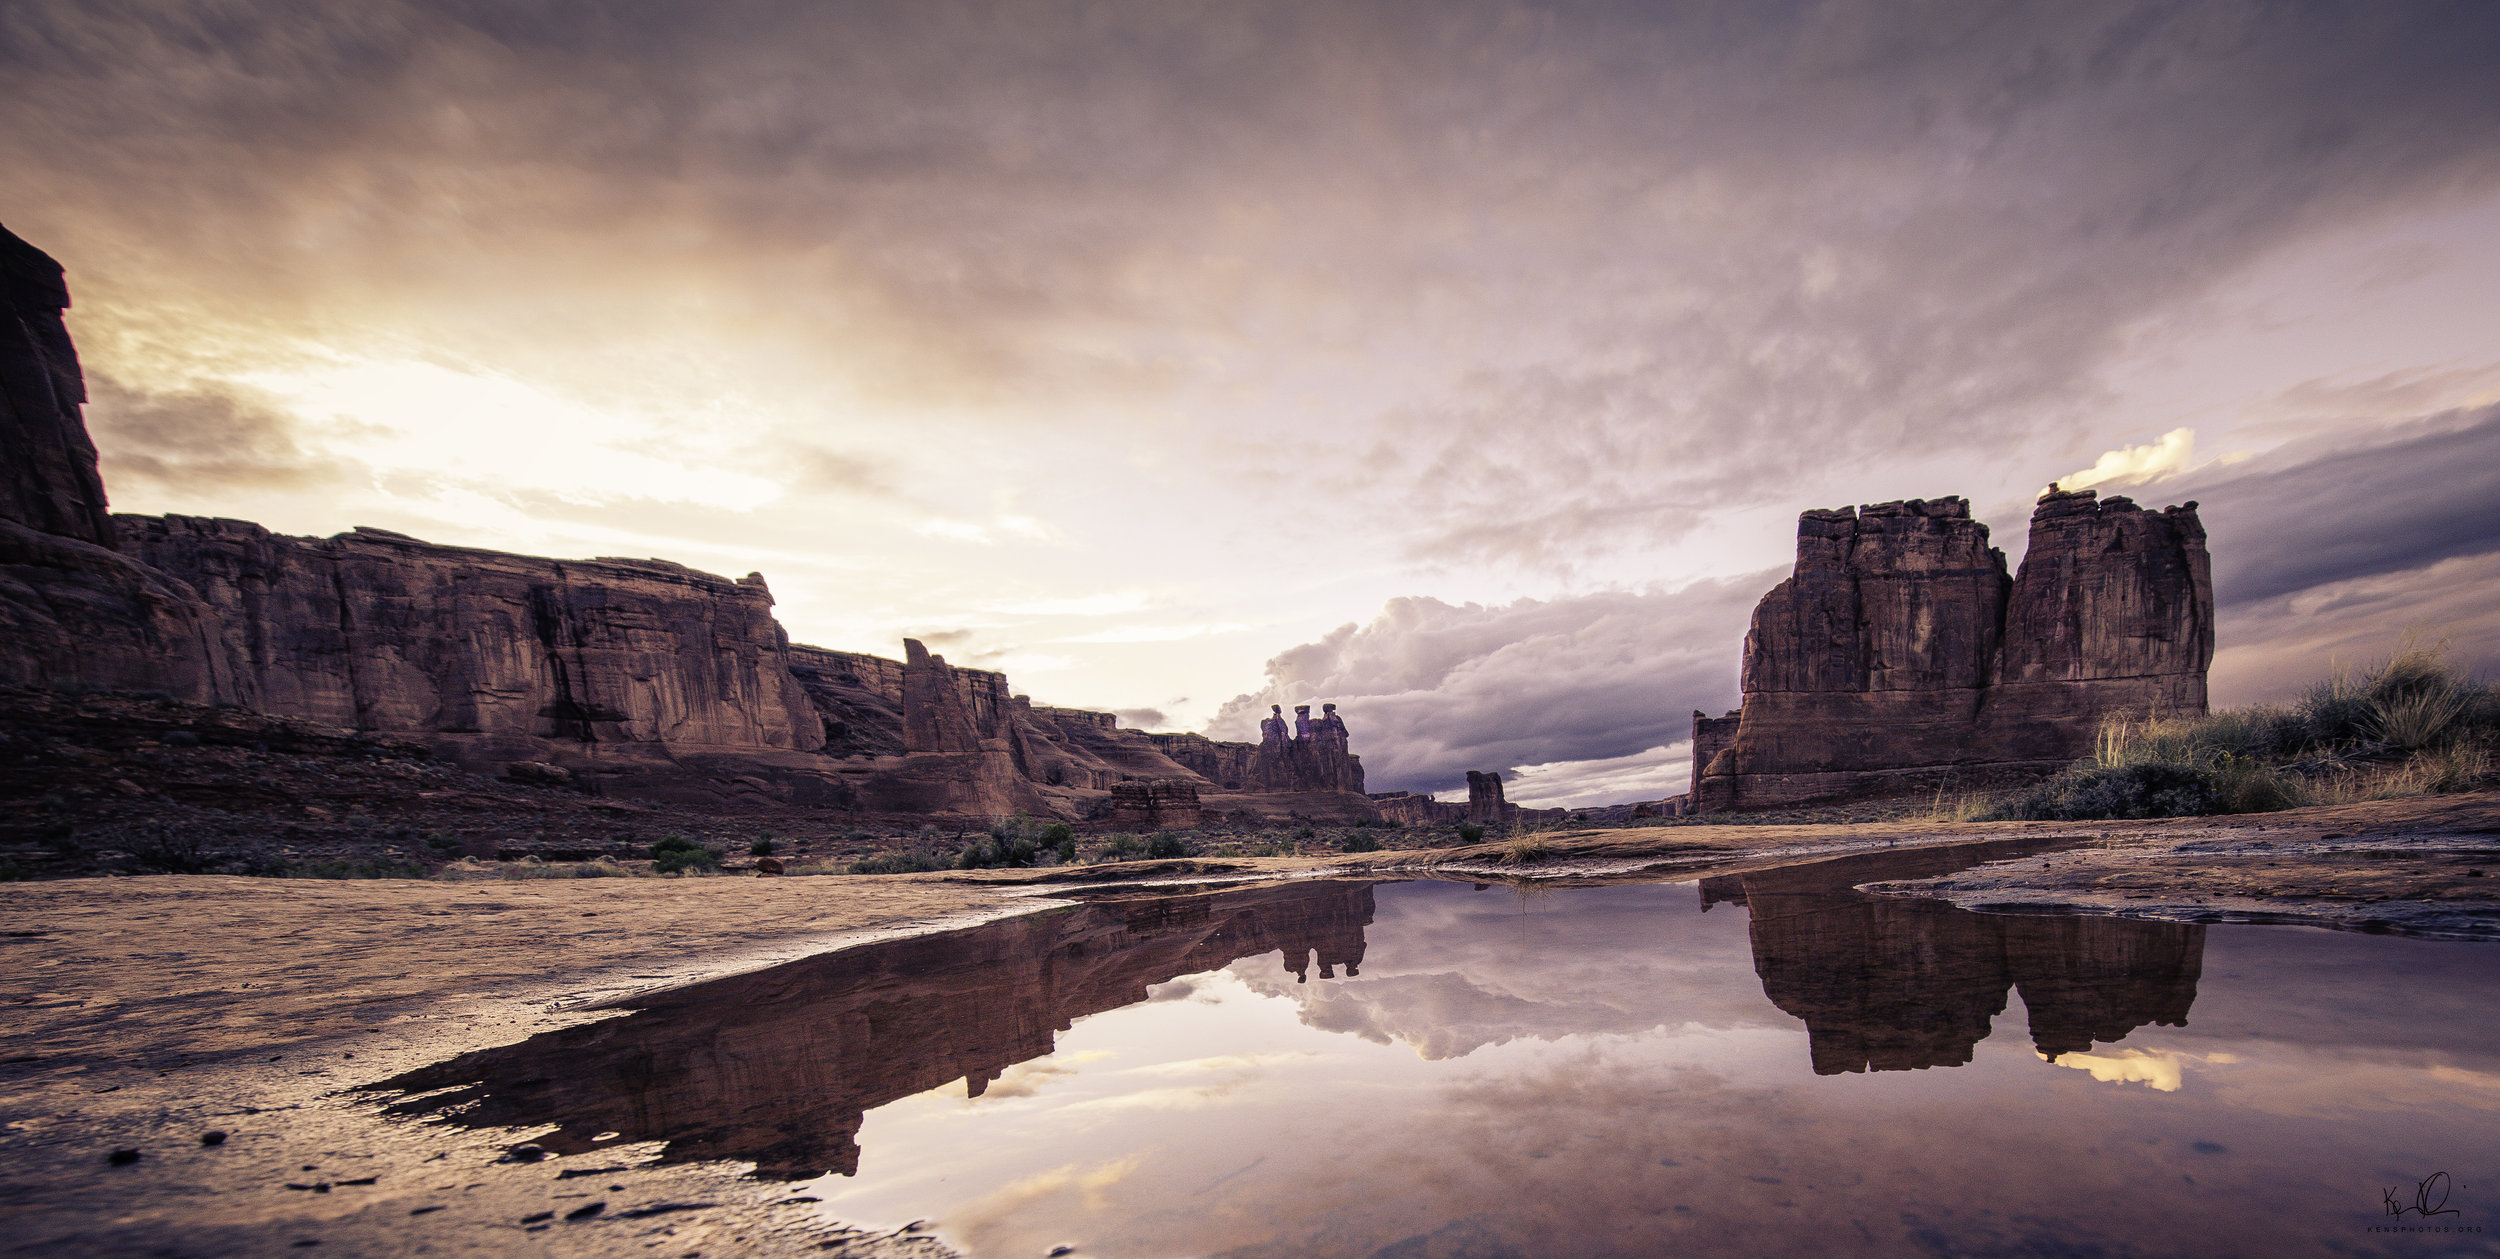   MOAB, UTAH.  YOU WILL NOT BE ABLE TO FIND THIS BODY OF WATER IF YOU GO TO MOAB. THE REASON IS IT RAINED, A VERY RARE EVENT IN MOAB, AND THIS BODY OF WATER IS A PUDDLE. 